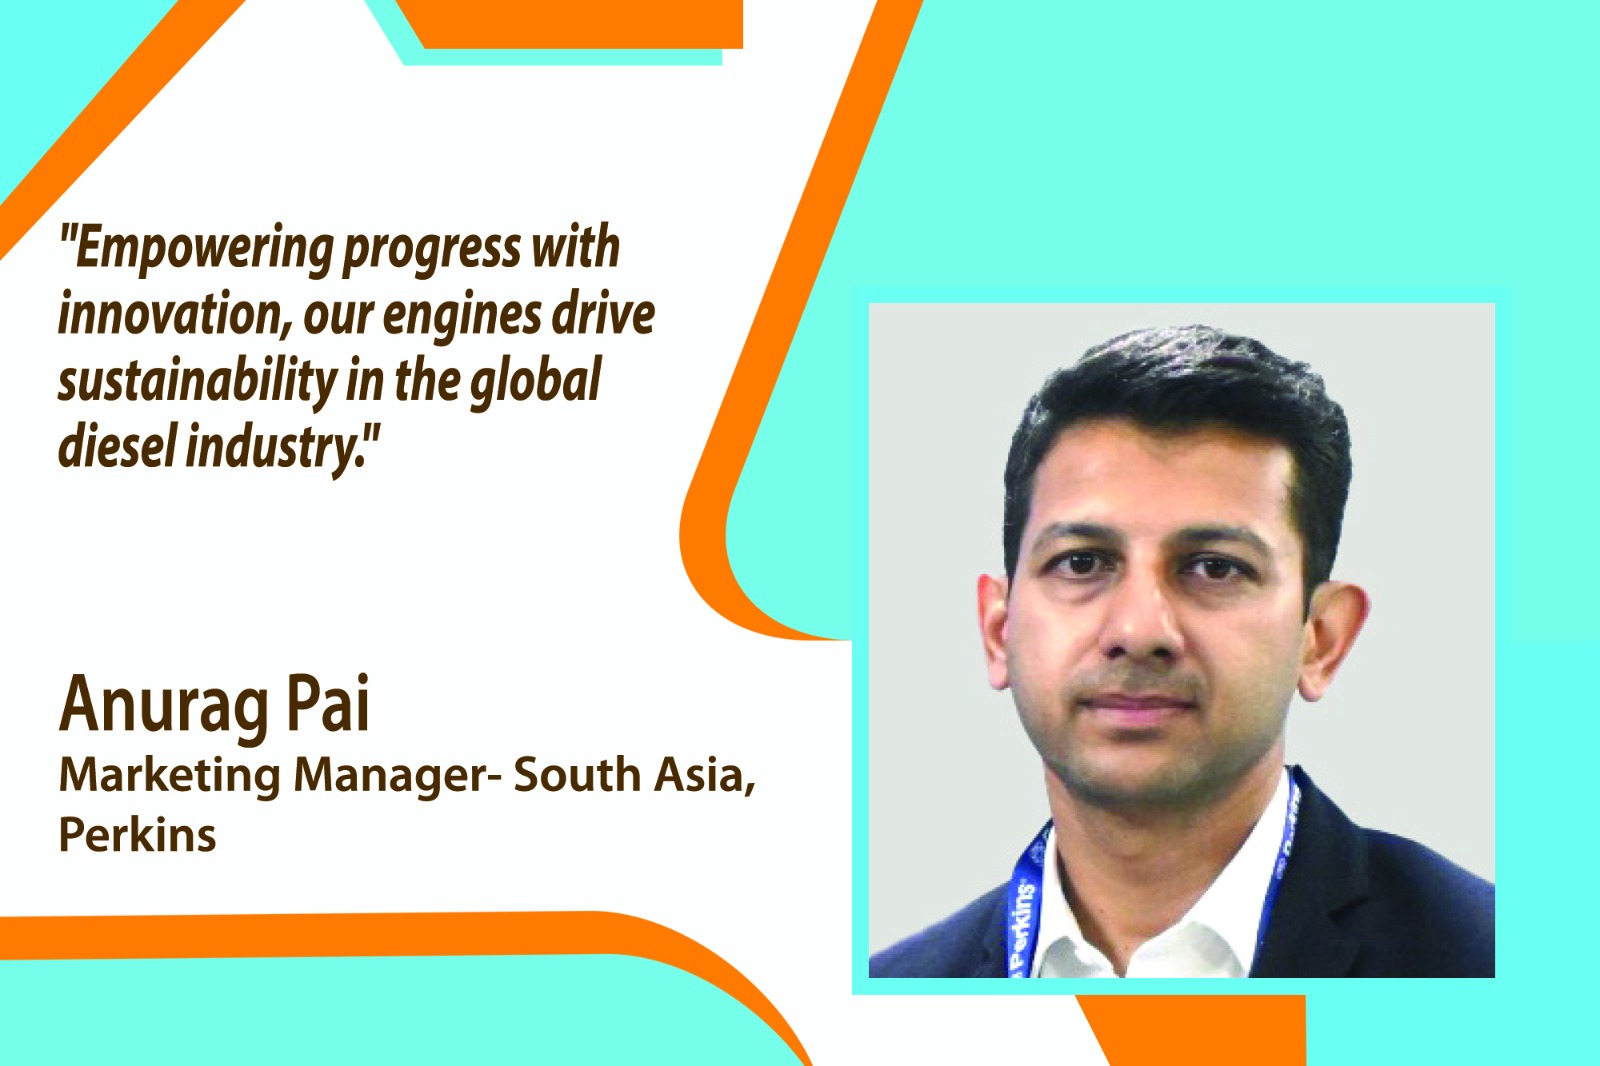 Anurag Pai, Marketing Manager- South Asia, Perkins, shares his thoughts and perspectives on the latest developments and innovations propelling the diesel engine industry forward.